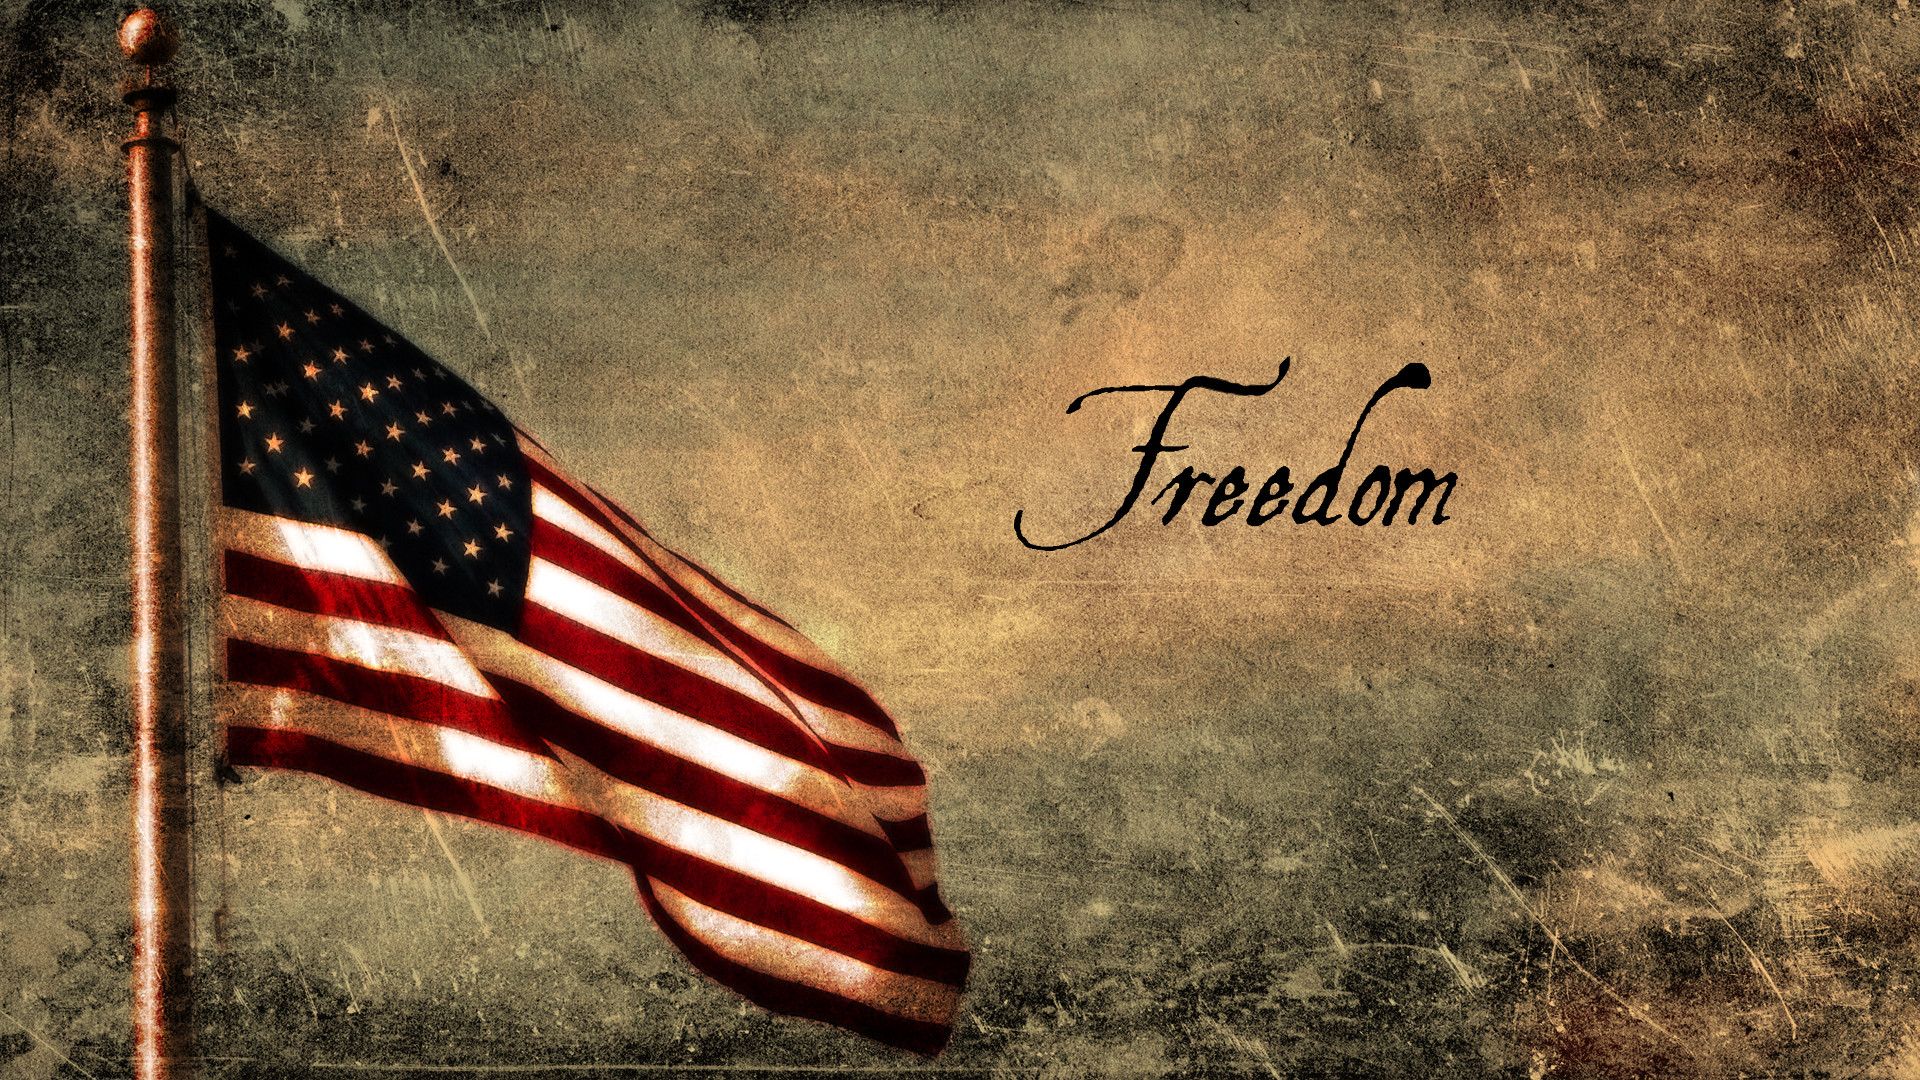 1920x1080 Wallpaper Of The Day Freedom Common Sense Evaluation 